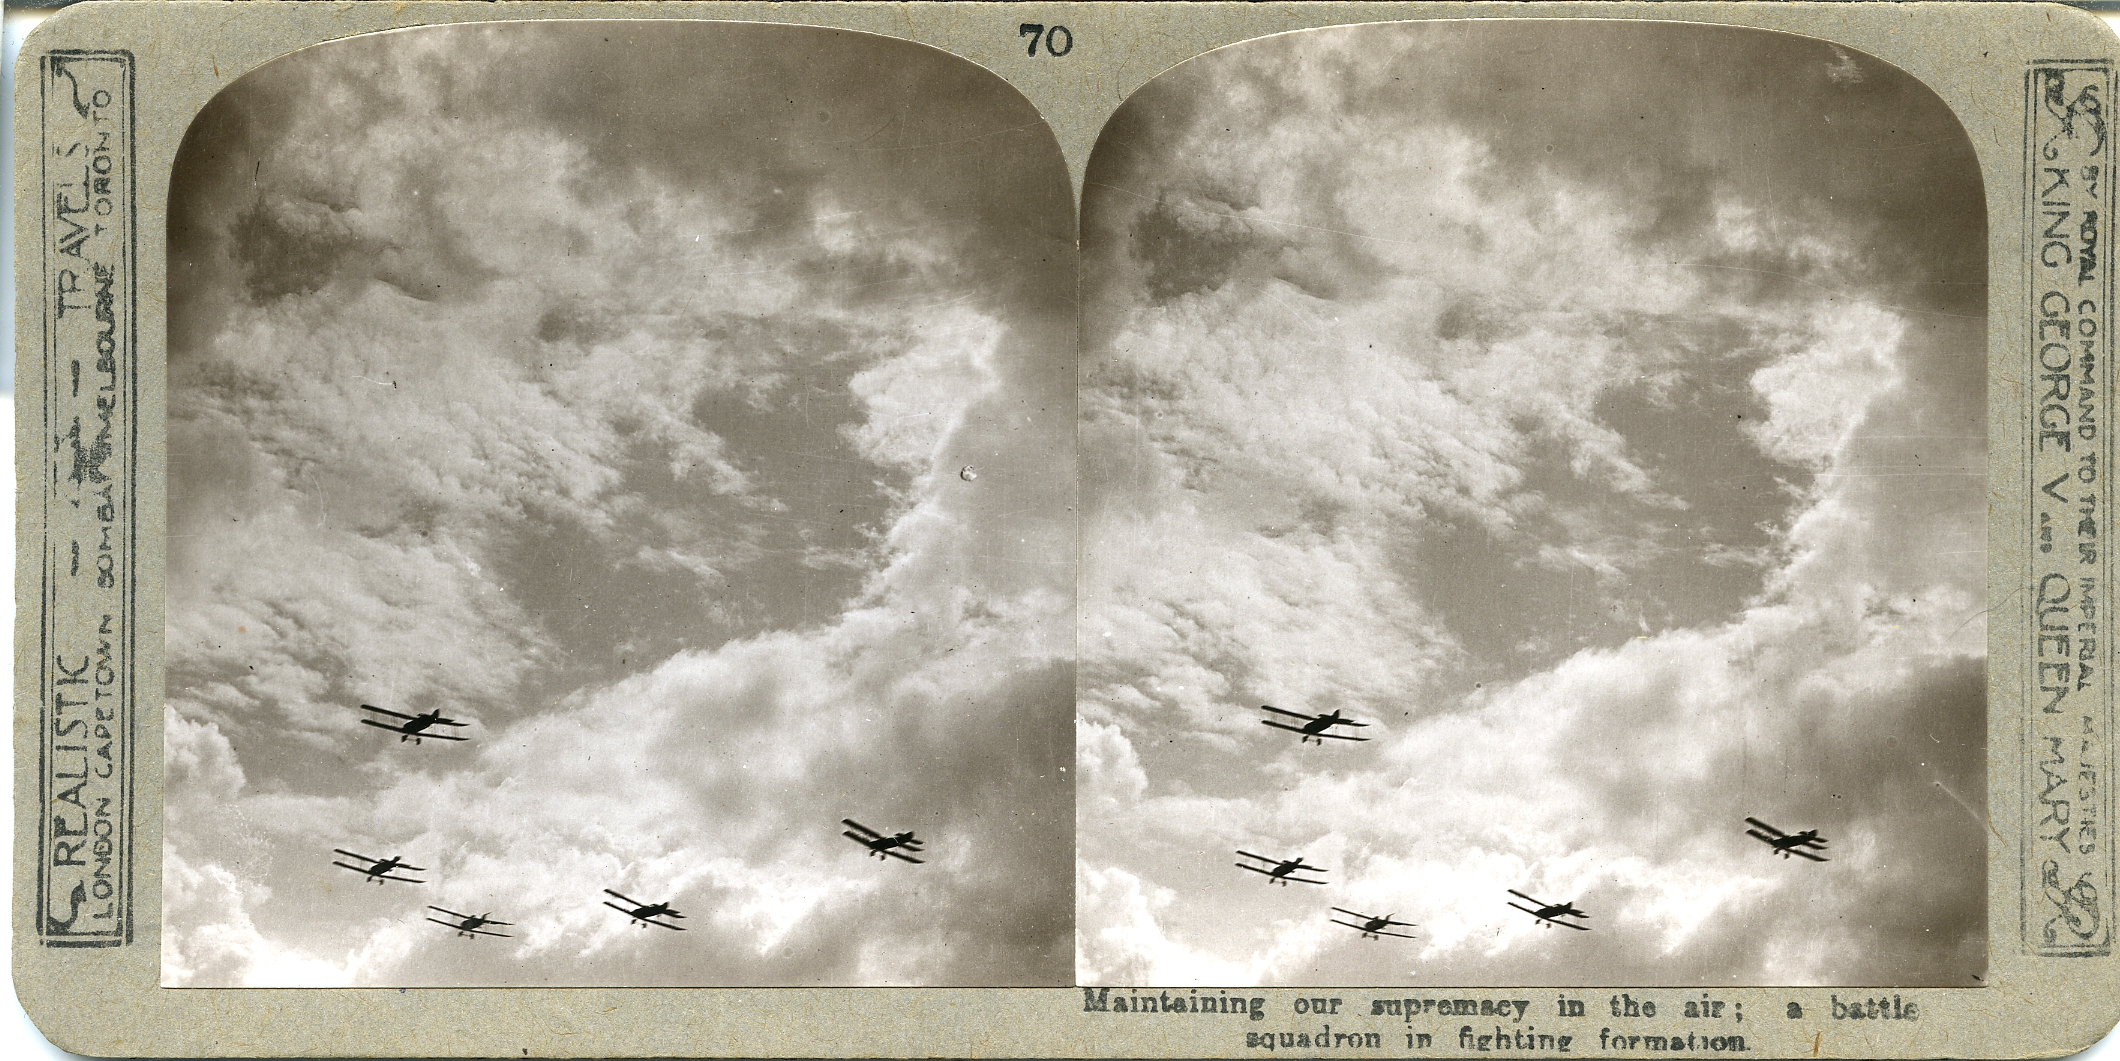 Maintaining our supremacy in the air, a squadron of battle-planes in fighting formation